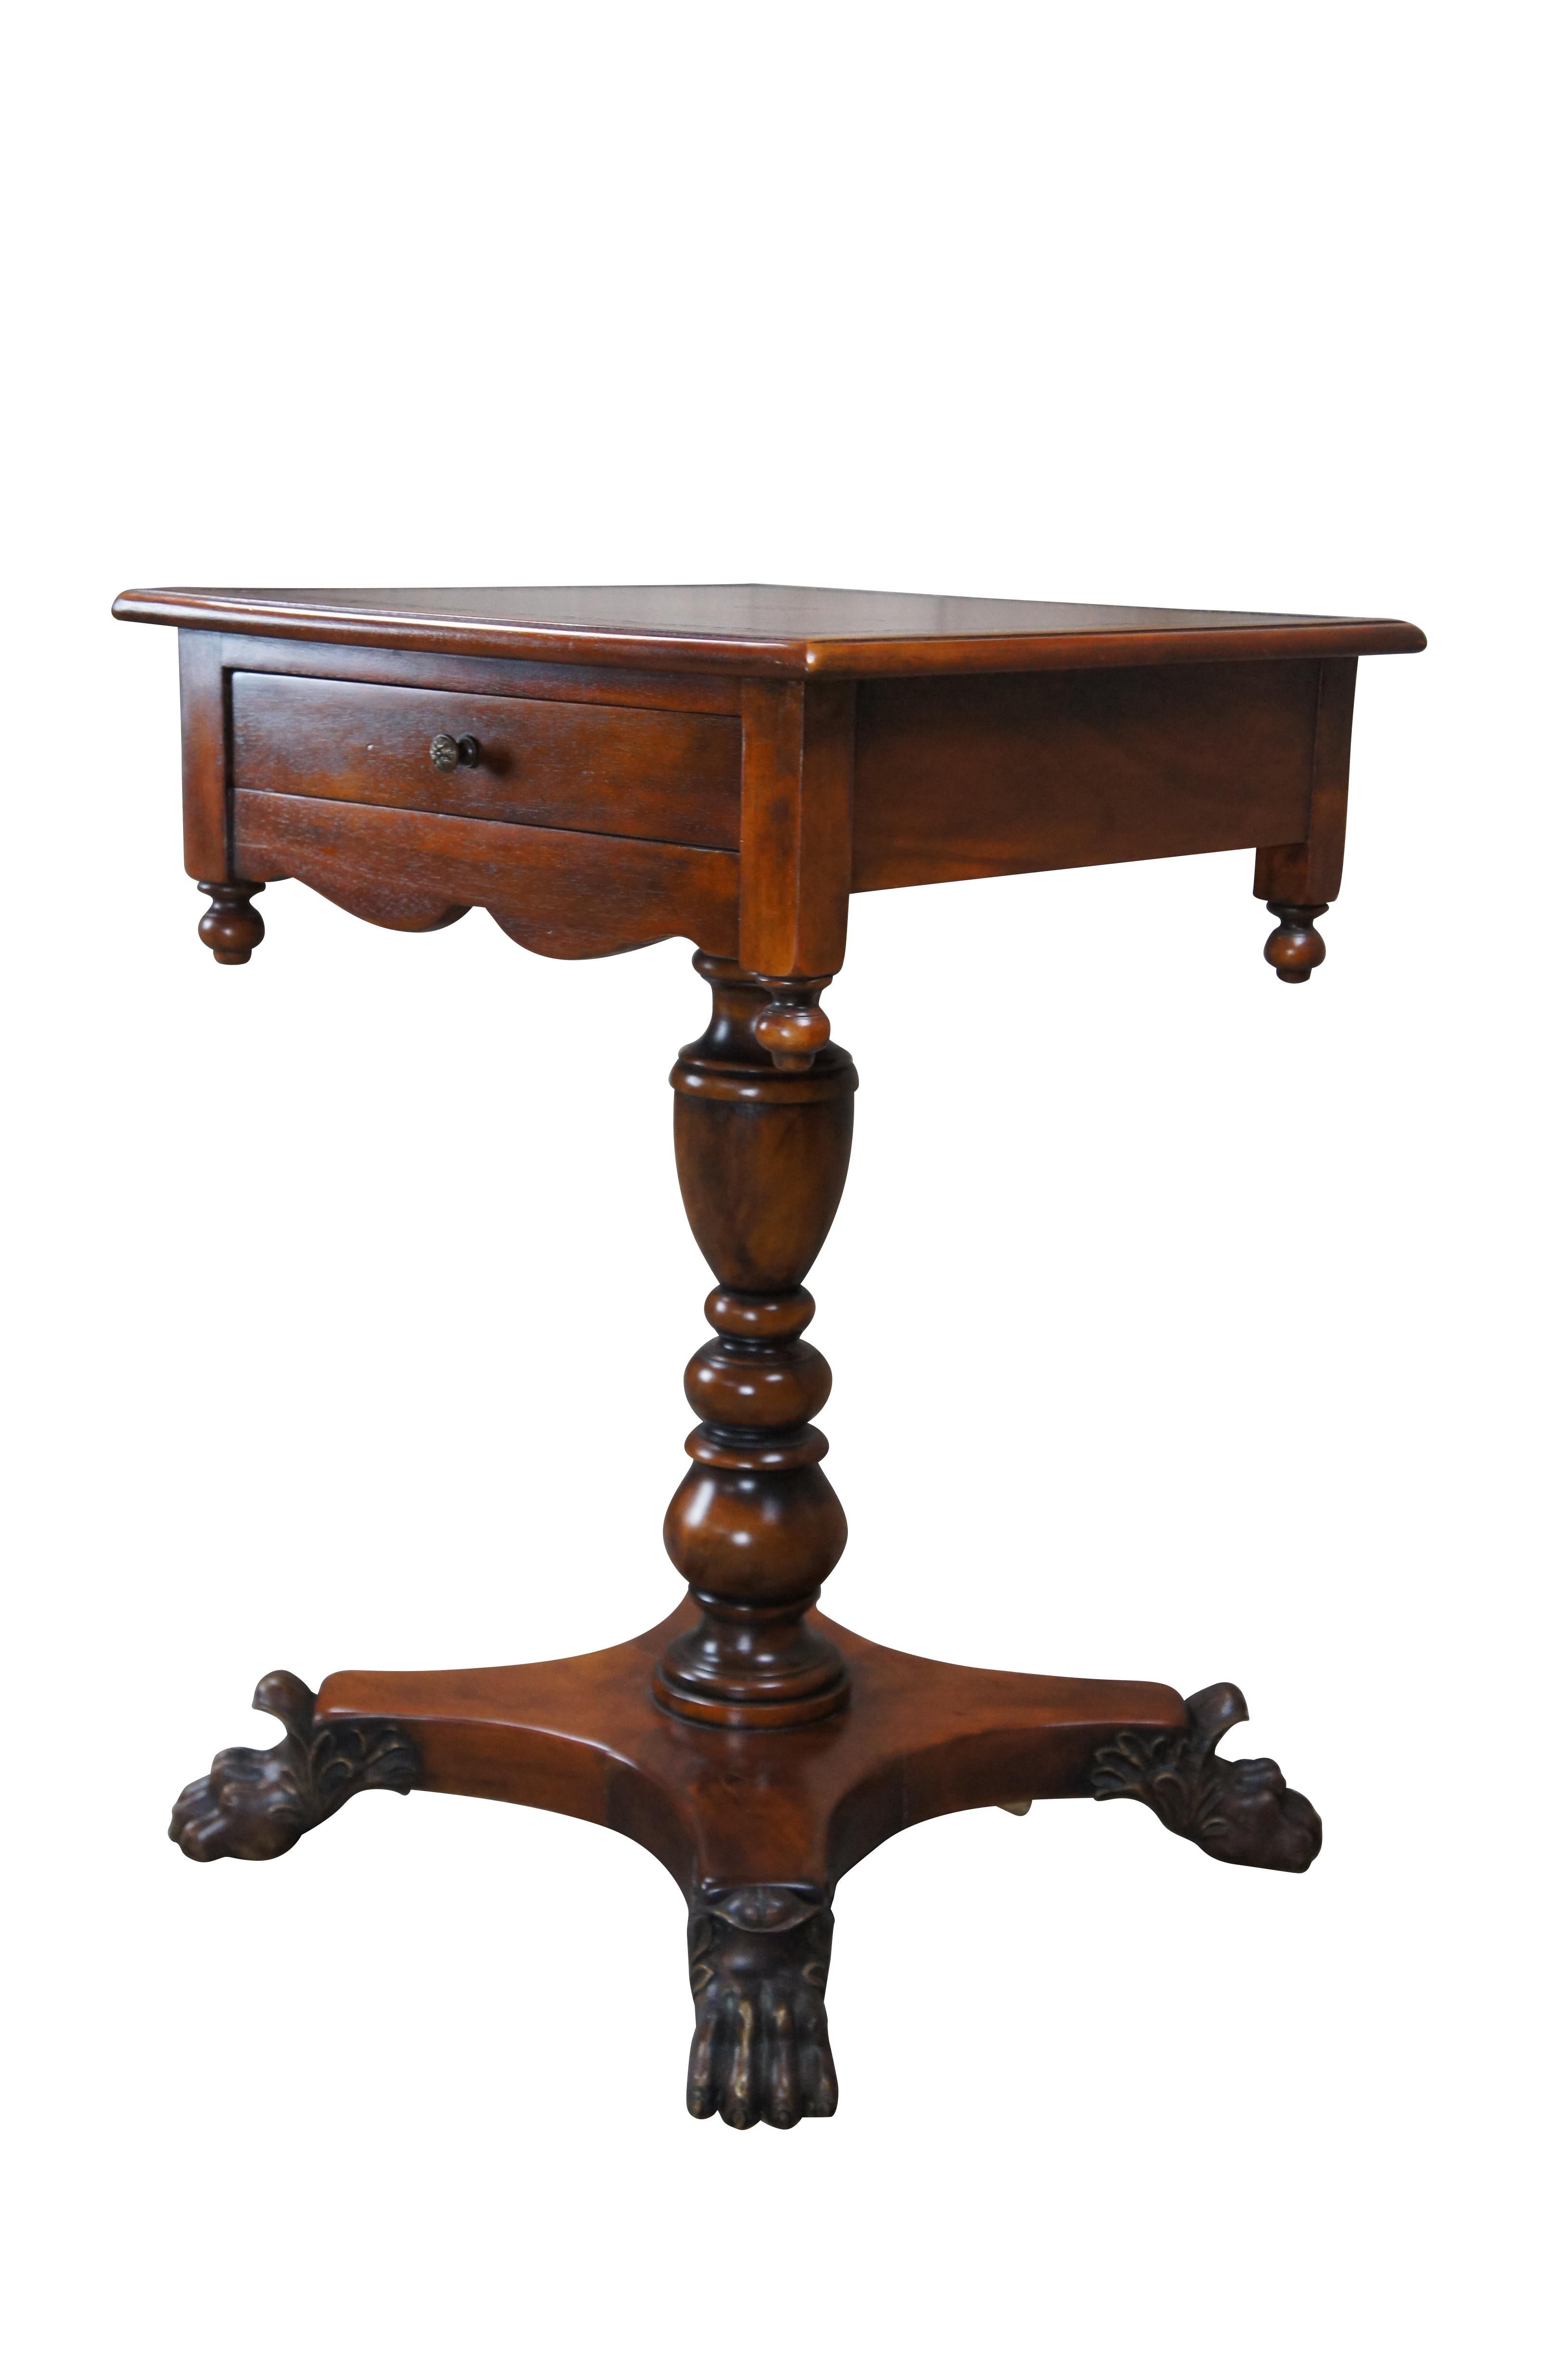 Theodore Alexander American Empire Style Carved Mahogany Leather Top Side Table In Good Condition For Sale In Dayton, OH